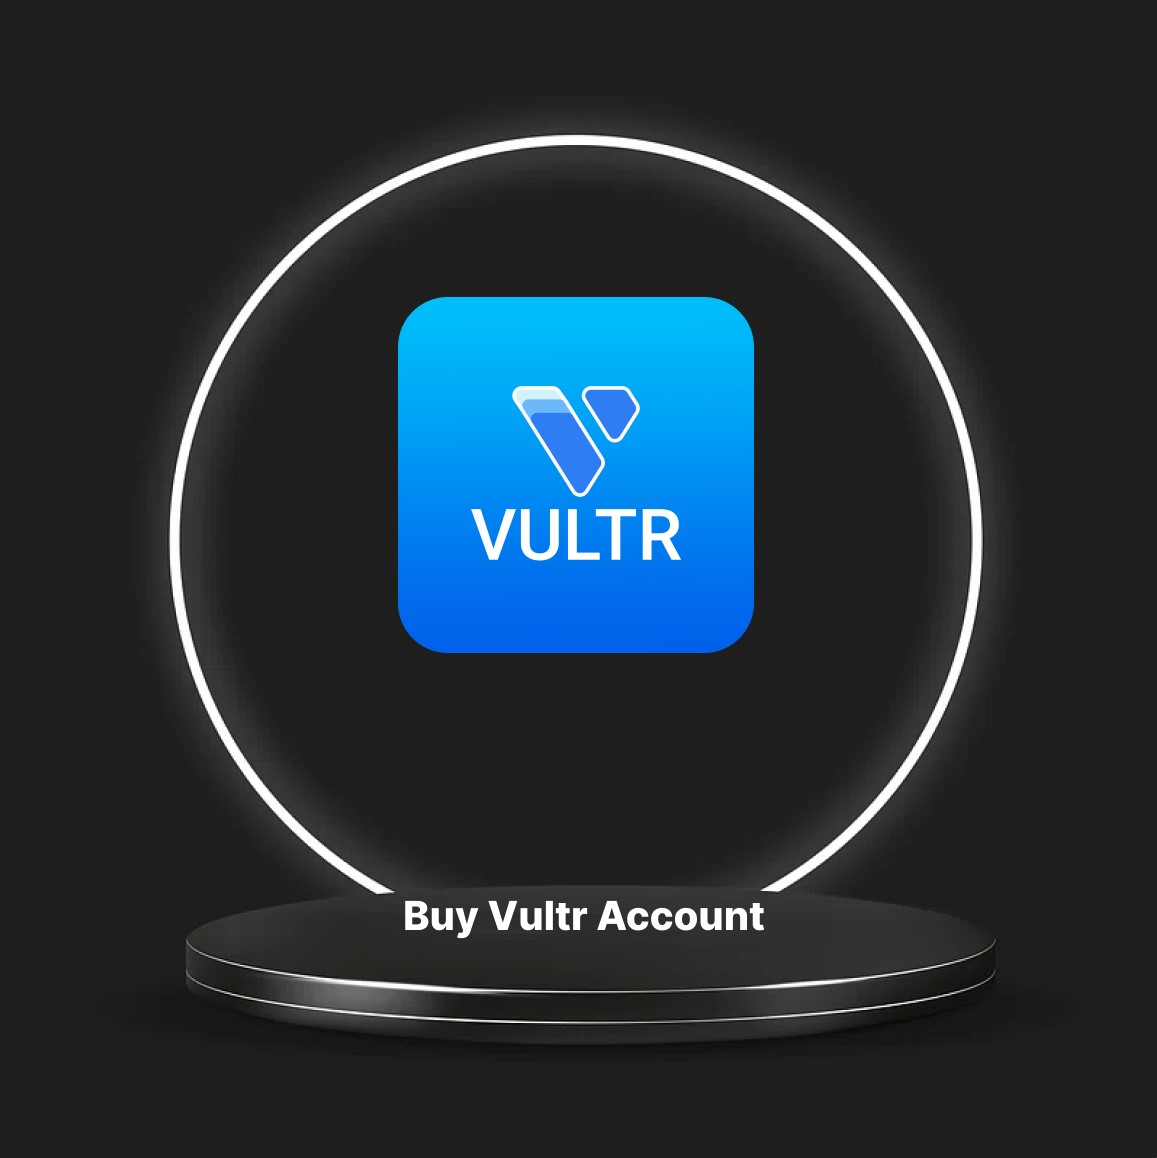 Buy Vultr Account - Cheap Price With Free $200 Credit